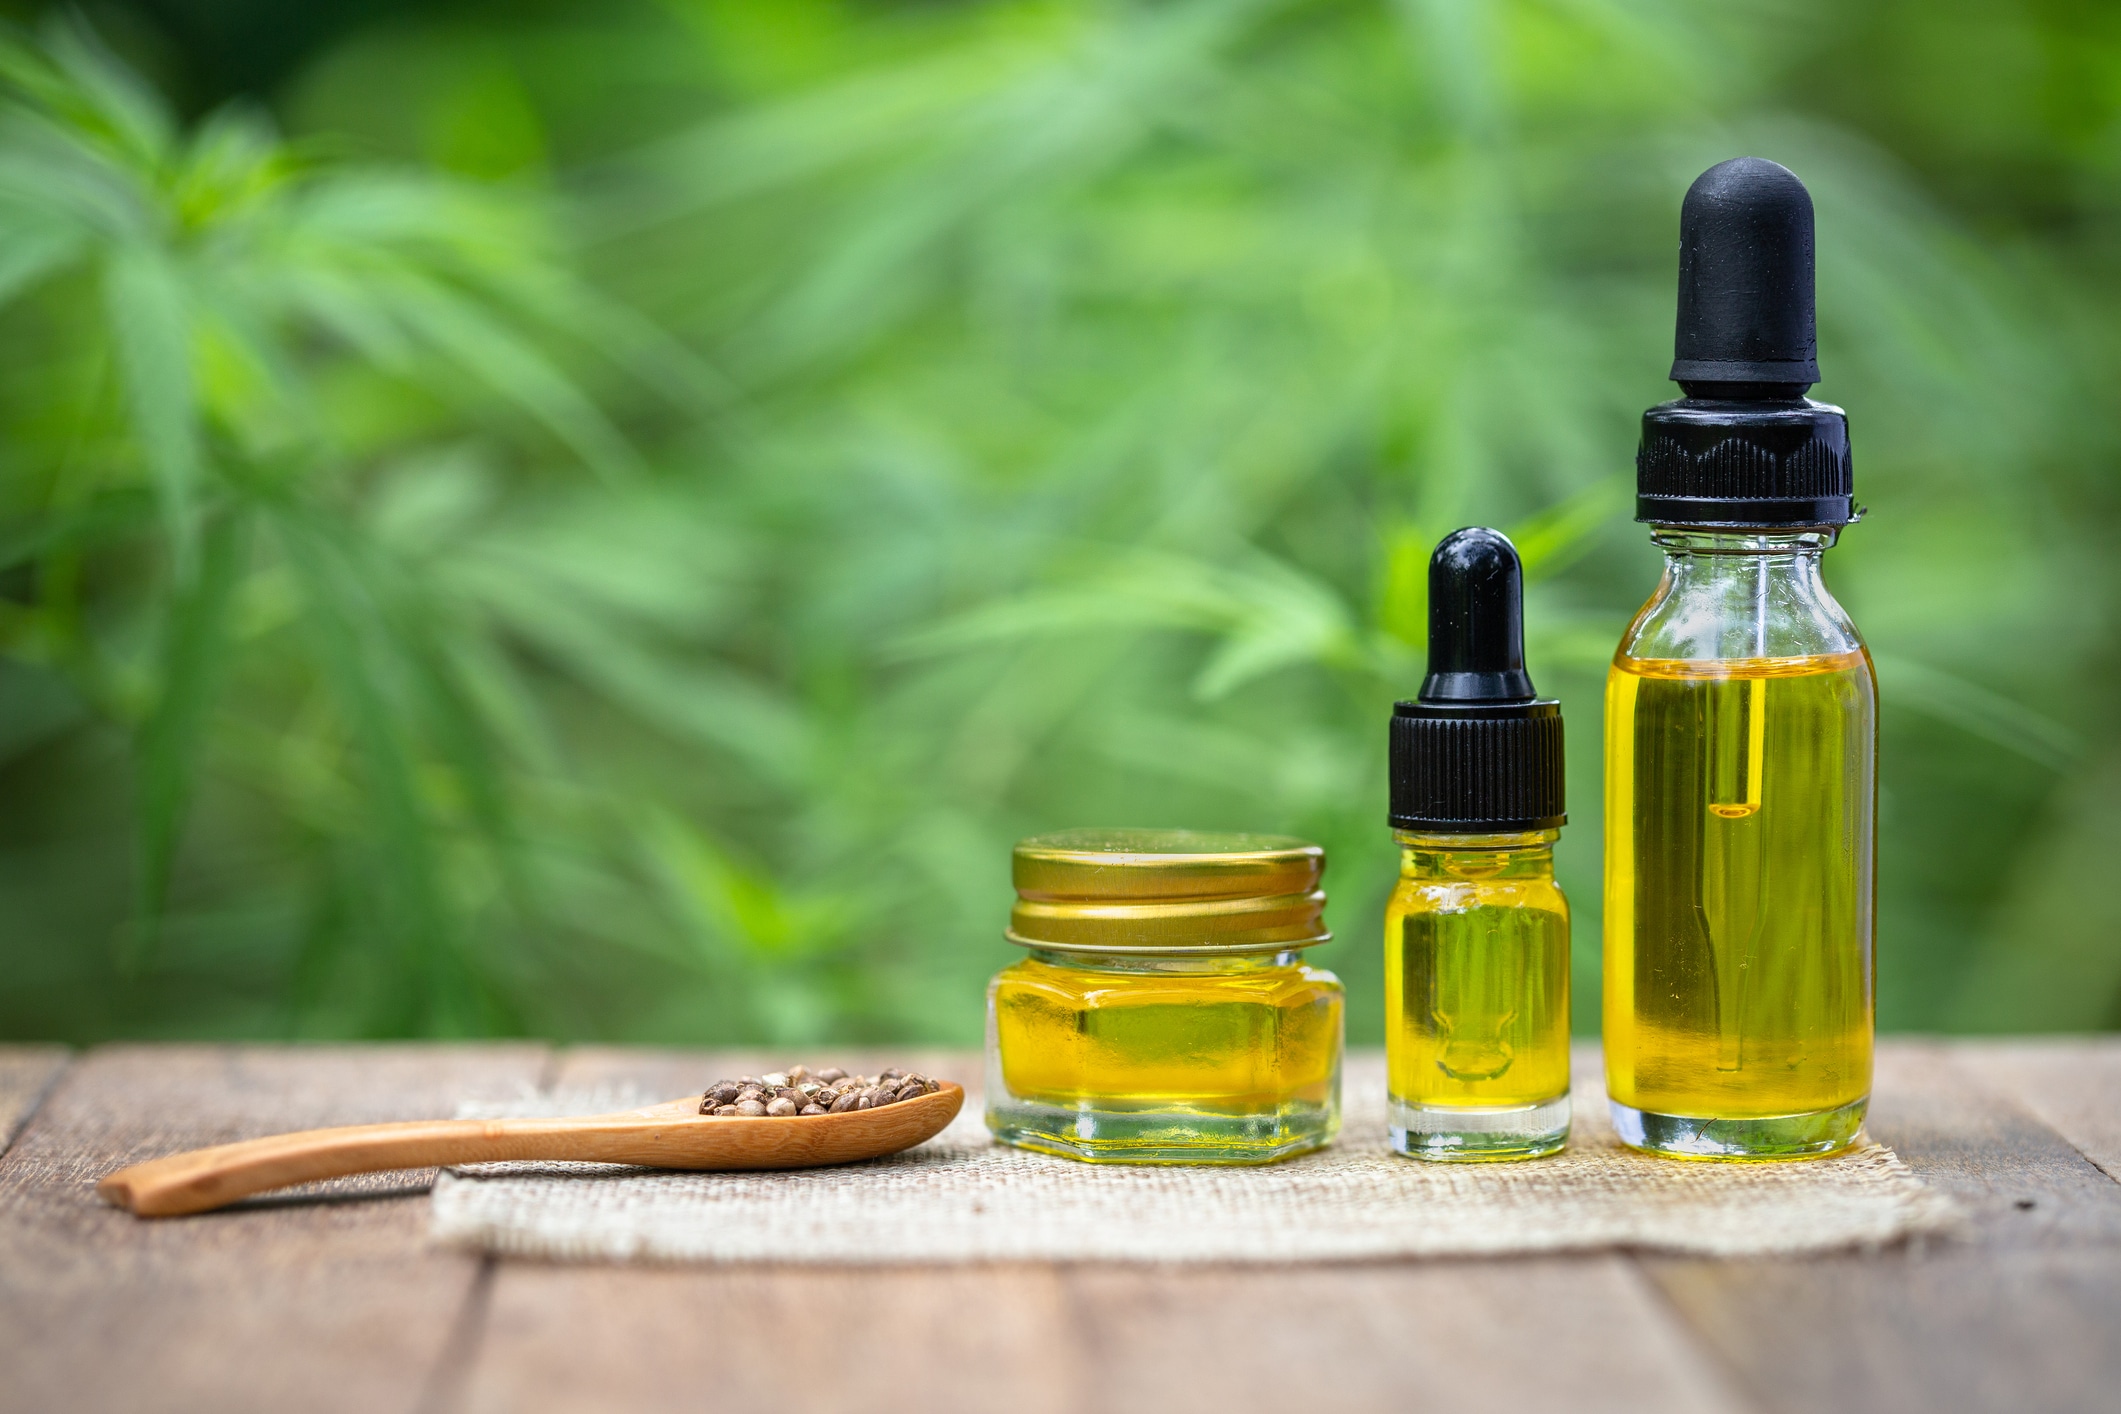 Top 6 CBD Oil To Use In 2021 For Headaches & Migraines